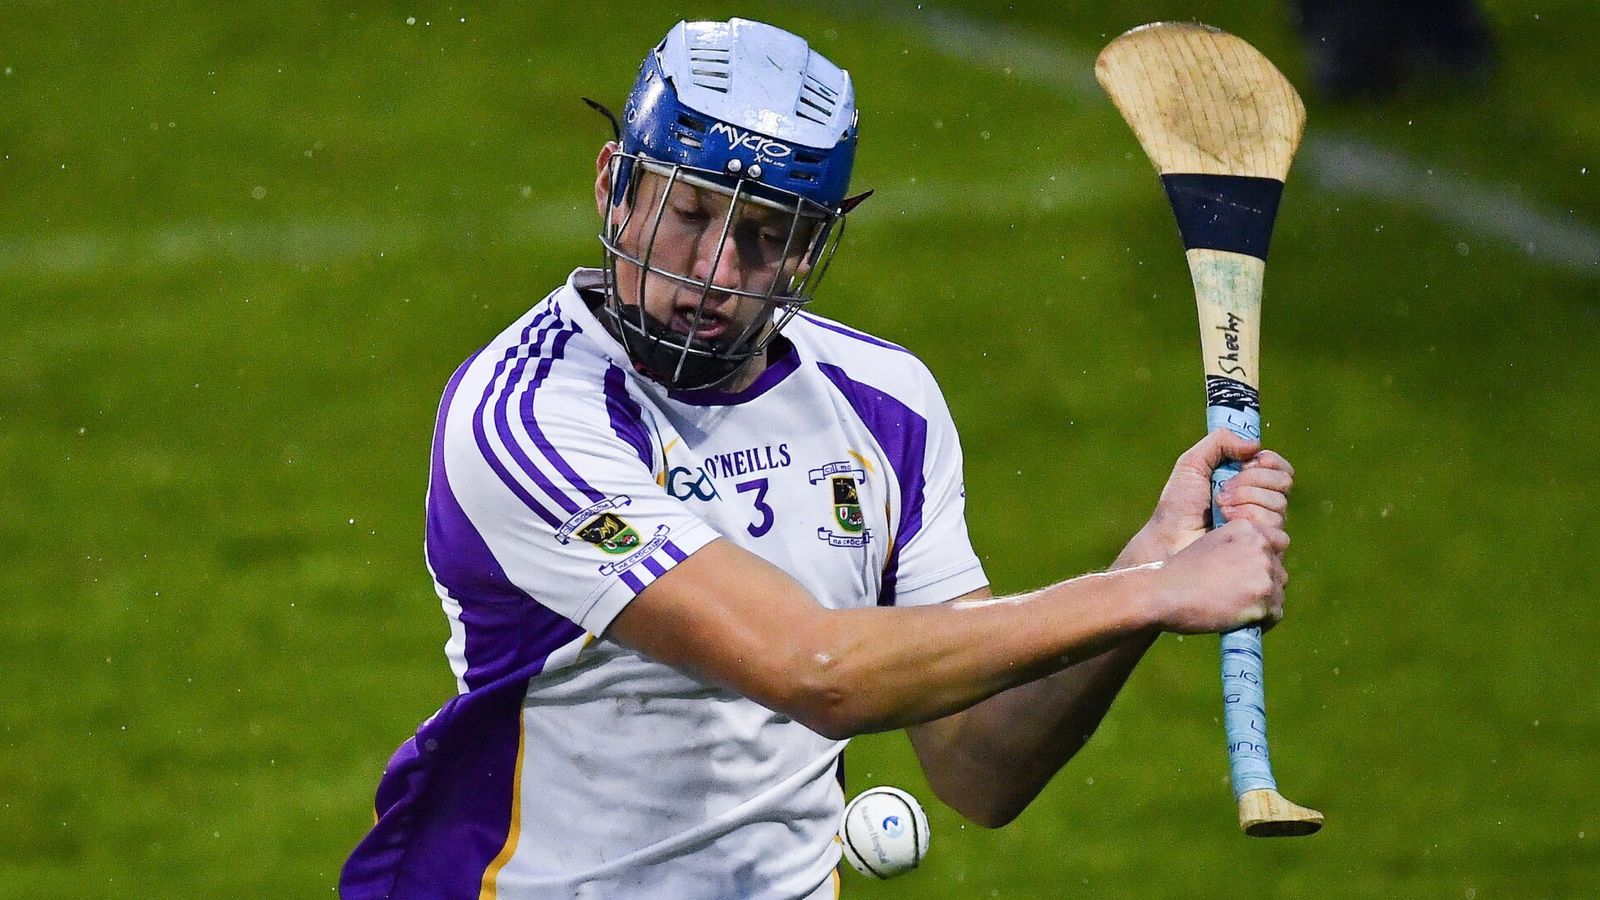 kilmacud-crokes-passionate-dual-player-brian-sheehy-battling-on-two-fronts